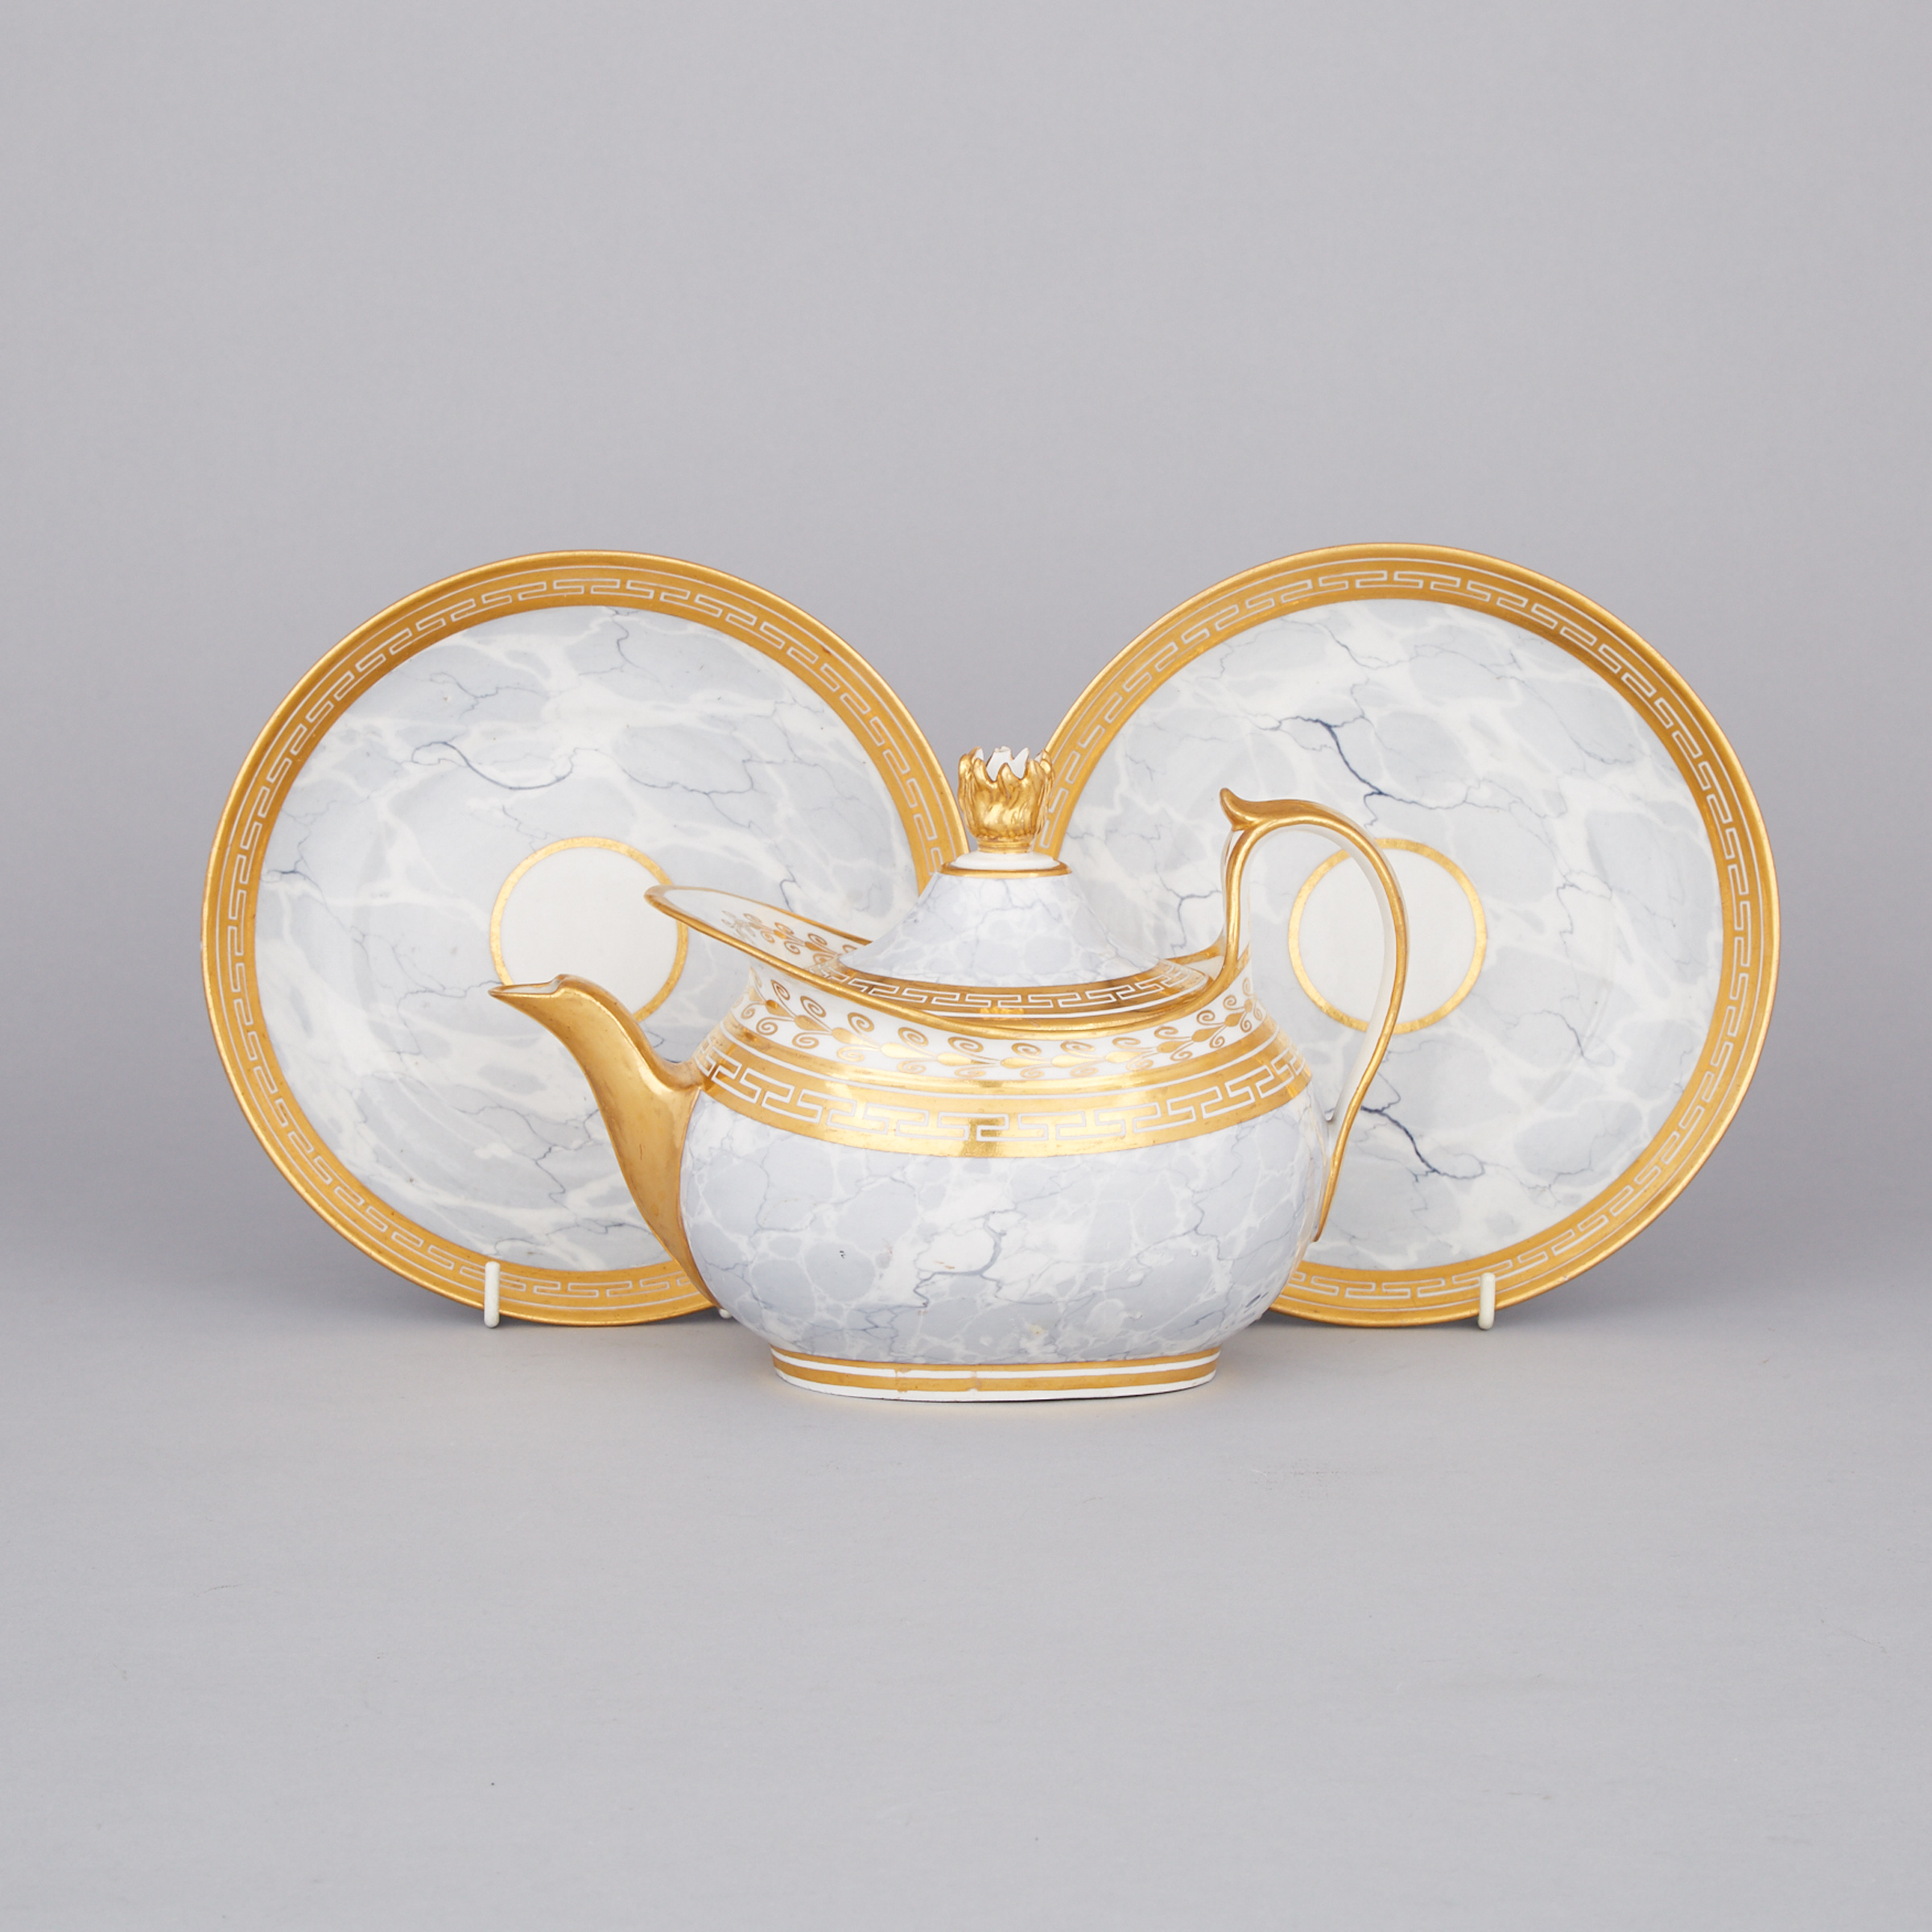 Flight & Barr Worcester Grey Marbled Ground and Gilt Teapot and Pair of Saucer Dishes, c.1800-05